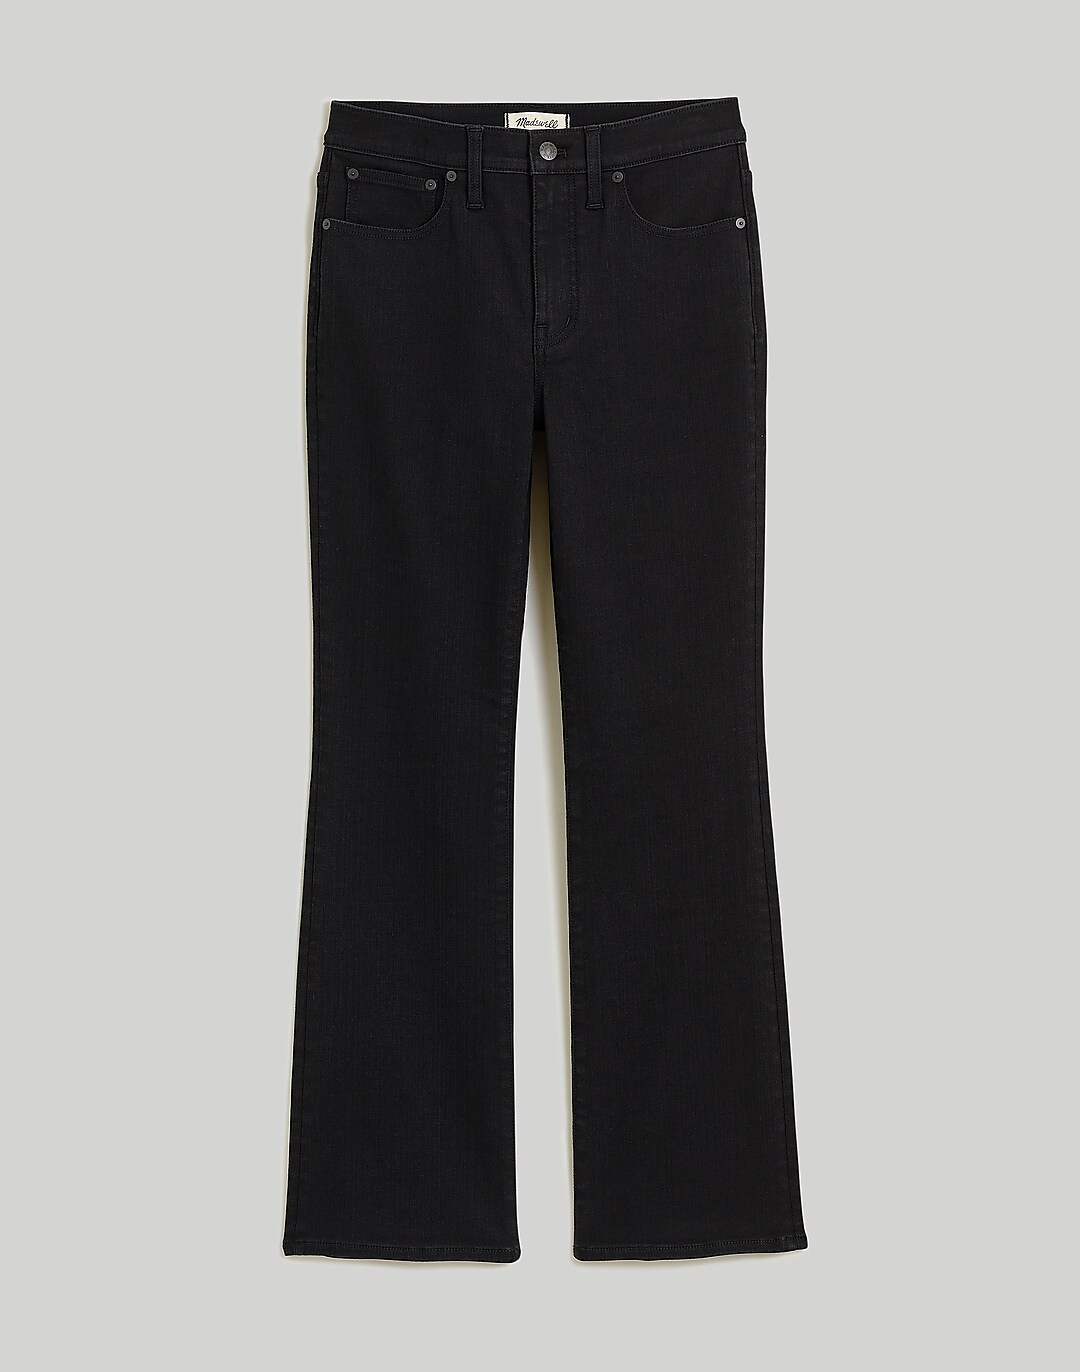 Kick Out Crop Jeans in True Black Wash: Coated Edition | Madewell